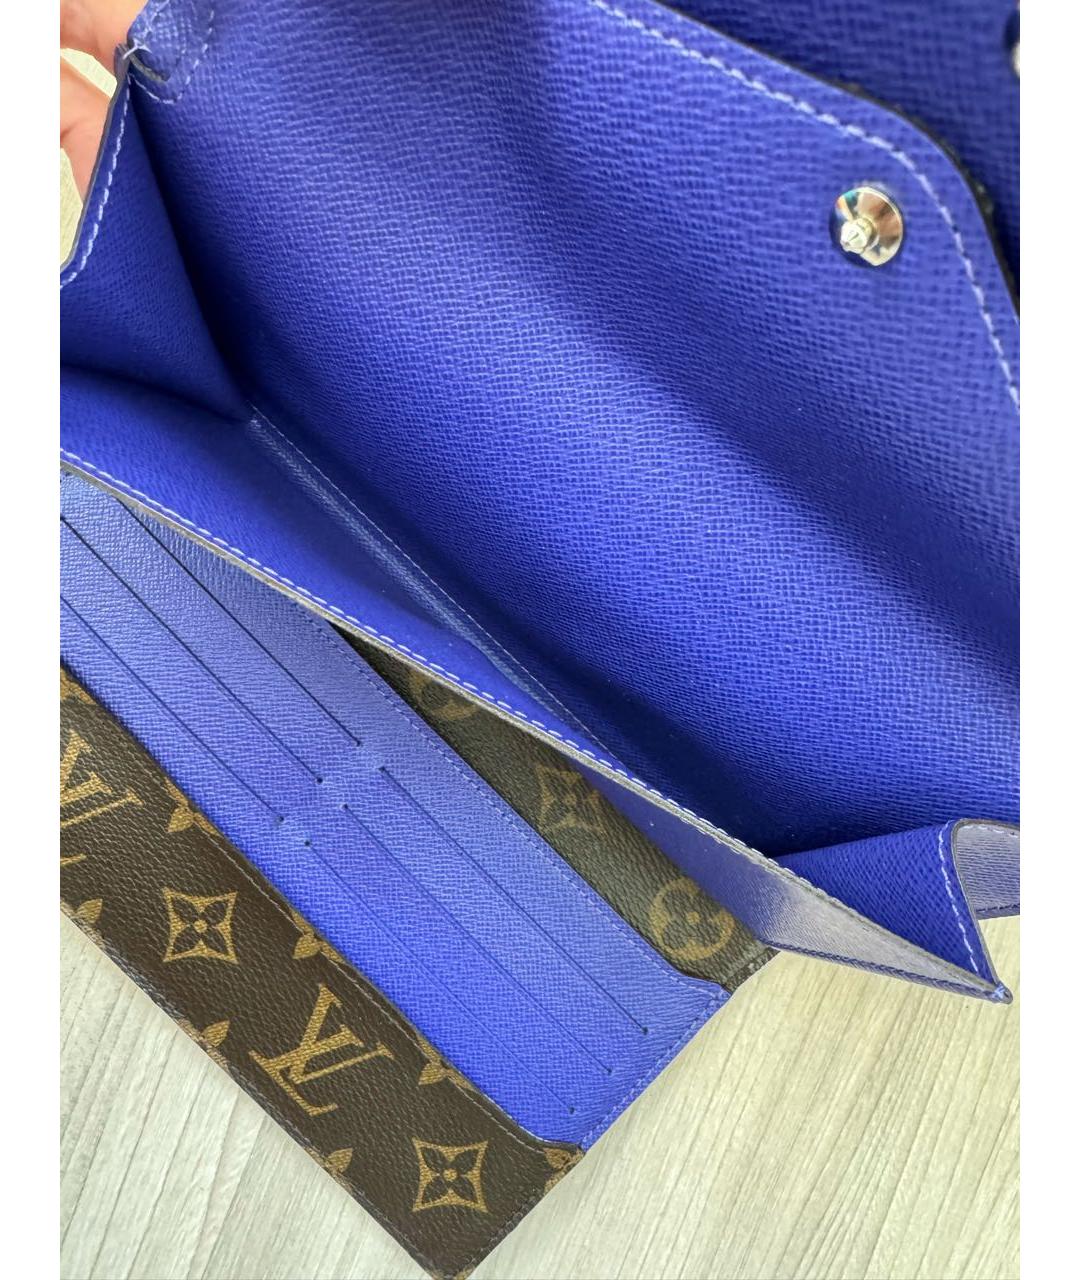 LOUIS VUITTON PRE-OWNED Кошелек, фото 6